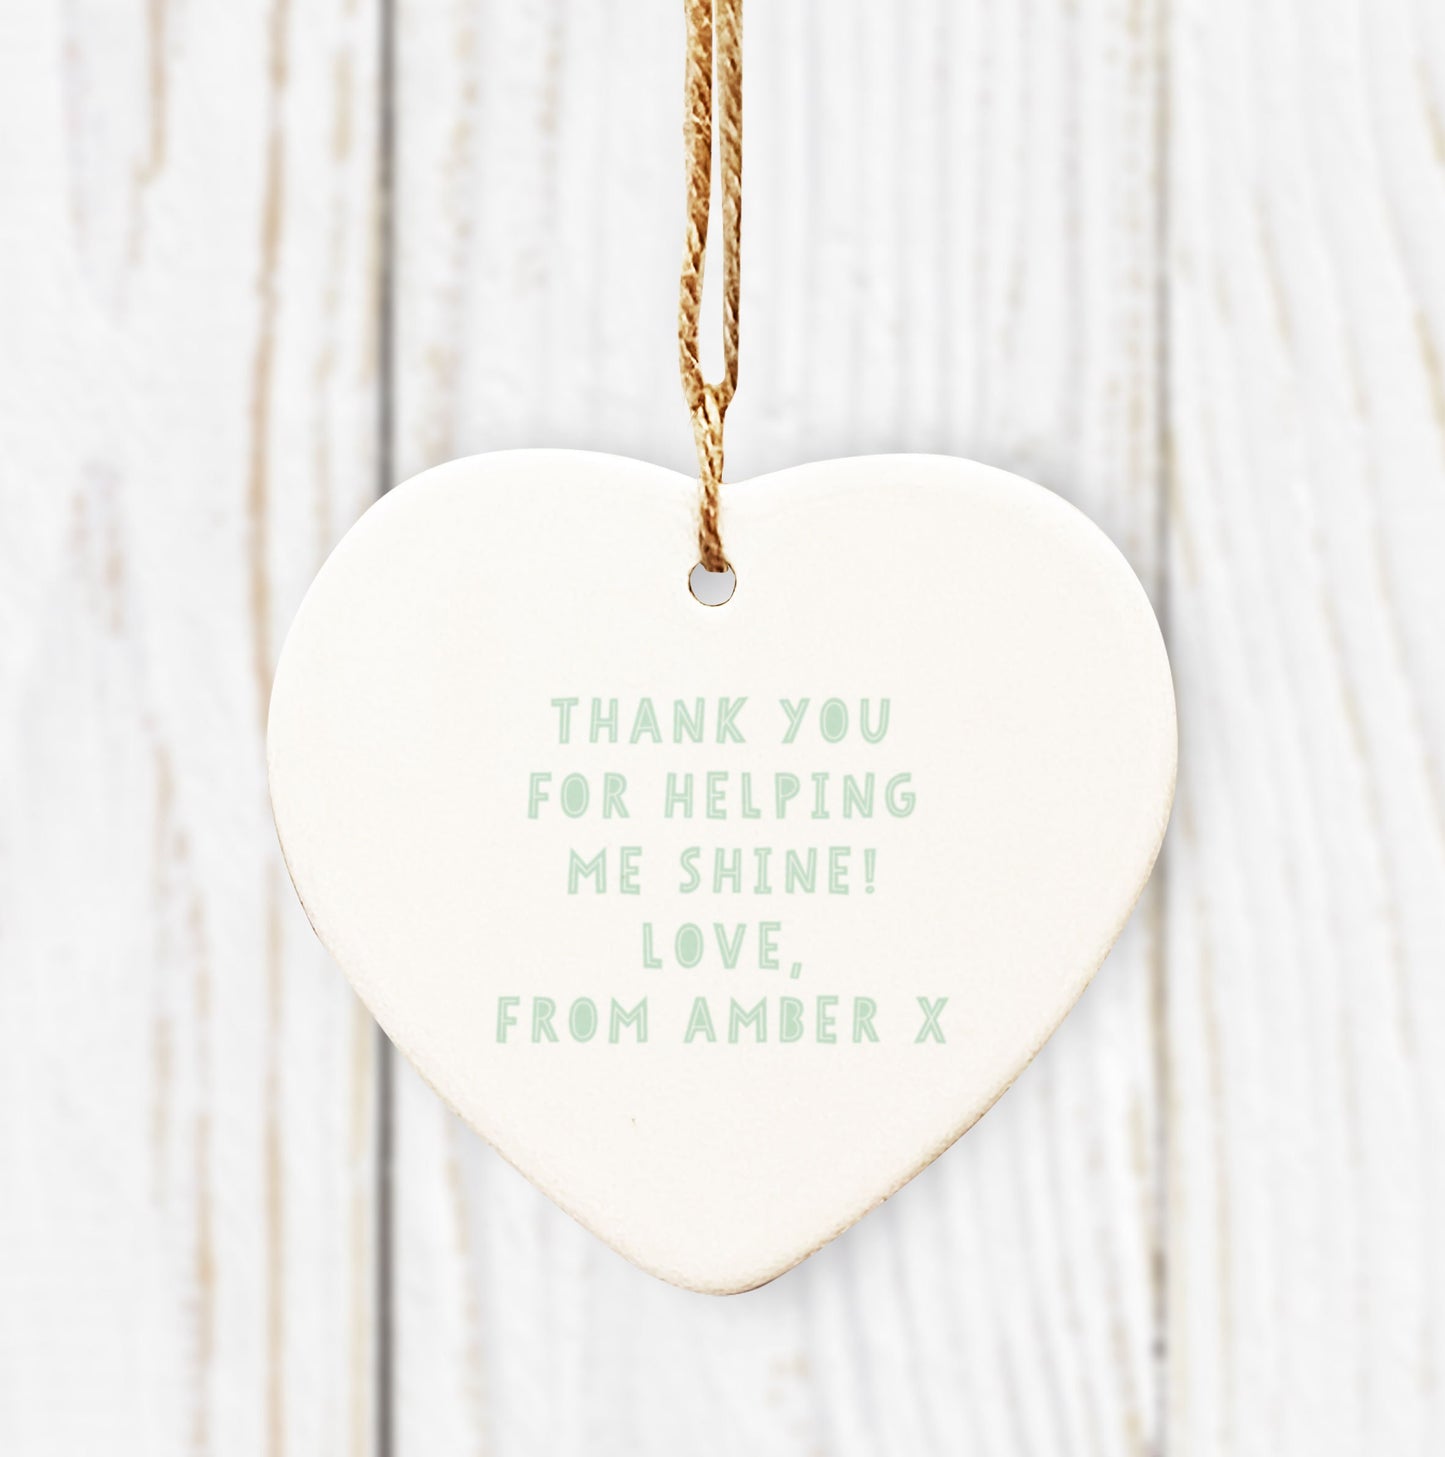 Thank You Teacher Apple Personalised Hanging Heart. Thank you teacher gift. Personalised Teacher Gift. Thank you gift. Ceramic ornament.